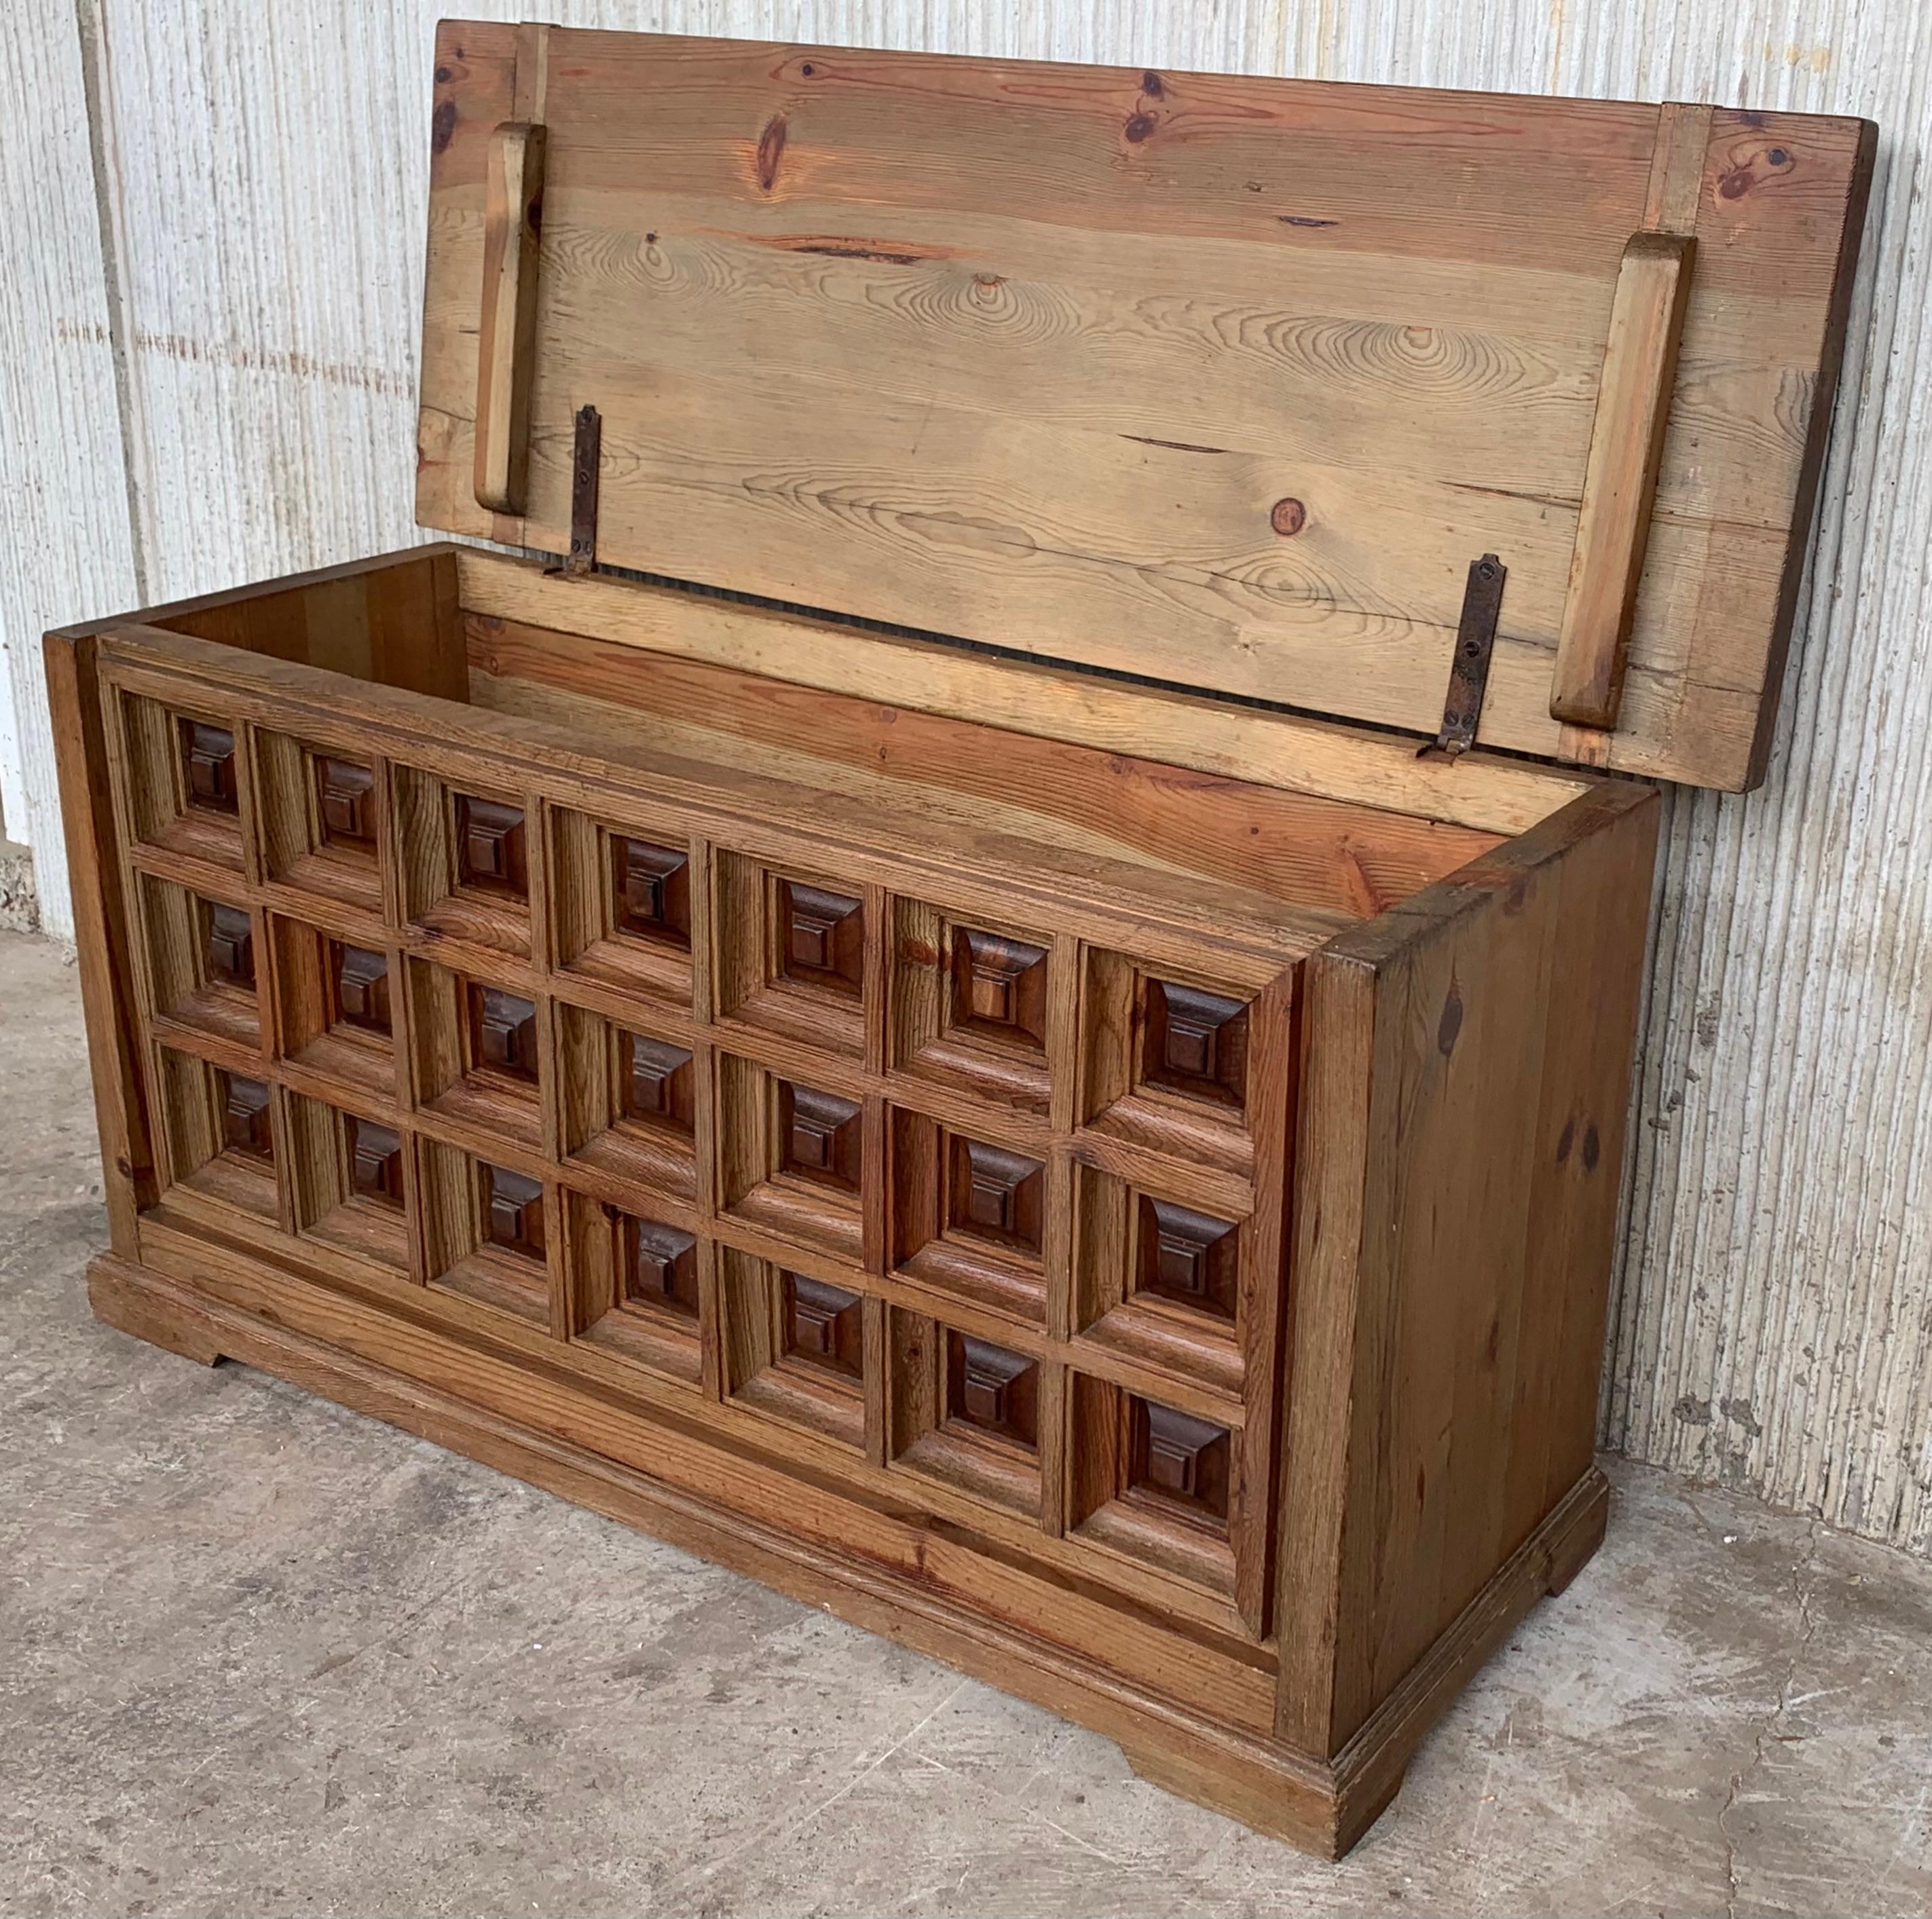 20th Century 20th Spanish Trunk, Blanket Chest with Raised Wooden Panels and Iron Hardware